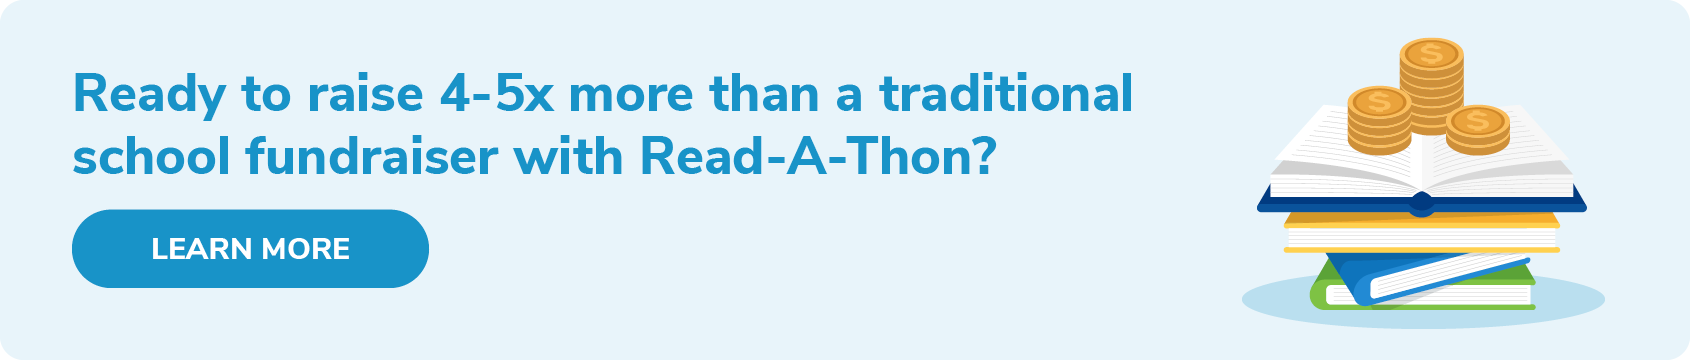 Click through to schedule a call or download Read-A-Thon resources to learn more about what a Read-A-Thon is and how your school can raise more.